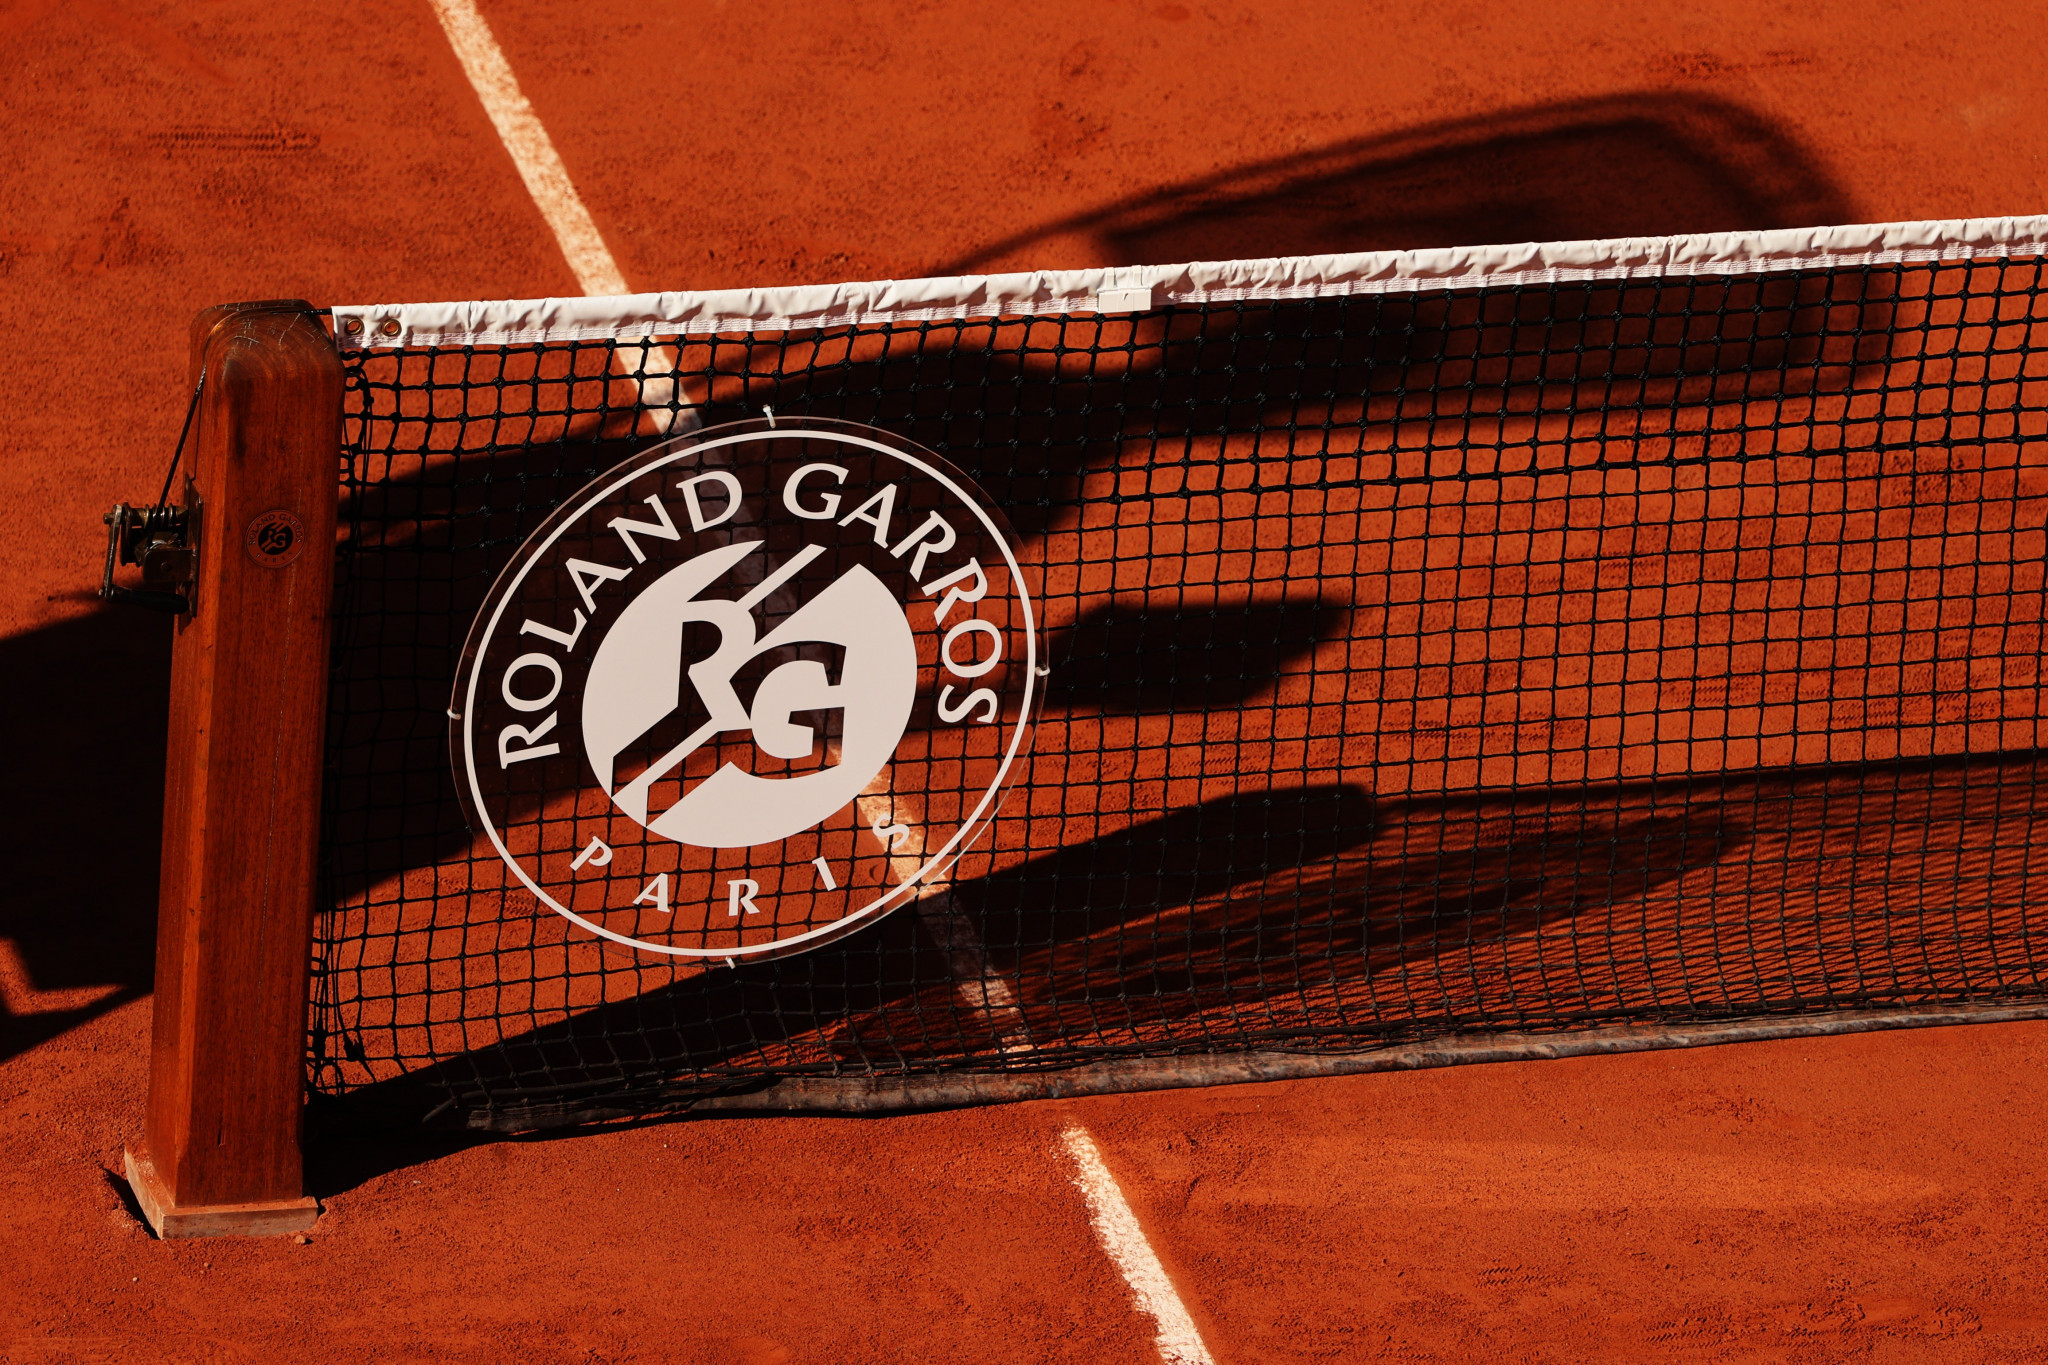 French Tennis Federation President Gilles Moretton said Roland Garros organisers' "position has not changed" on Russian and Belarusian players ©Getty Images